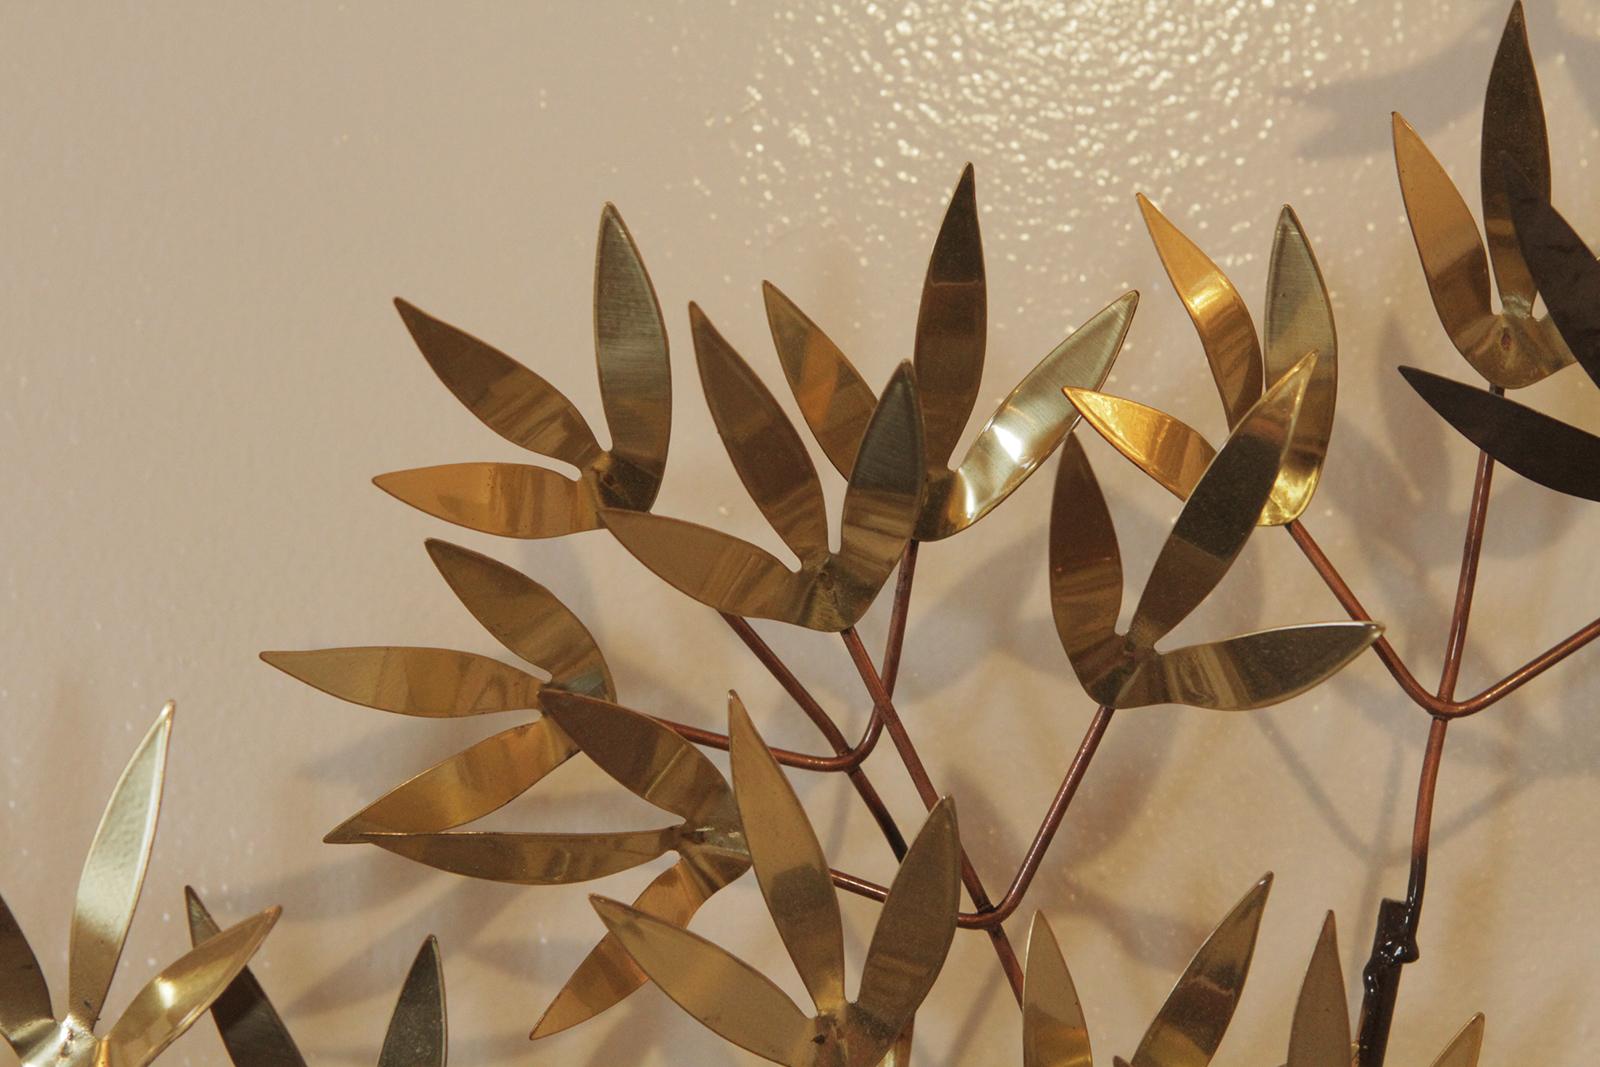 Brass wall sculpture by Curtis Jere. Signed and dated 1983. Cascades of leaves flow seamlessly to create windswept branches. Can be hung vertical or horizontal.